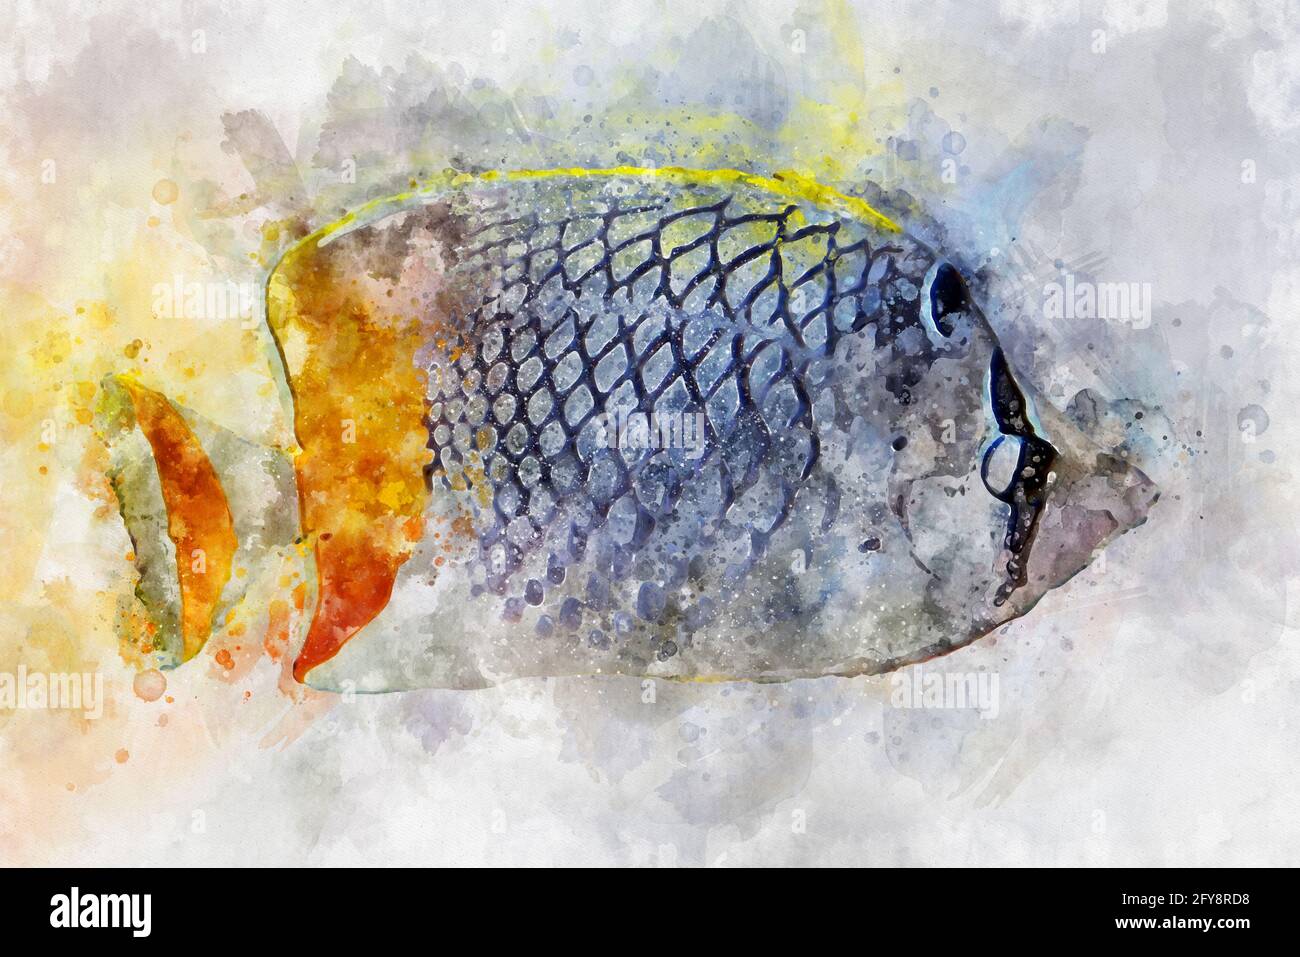 Watercolor illustration of tropic fish pearlscale butterflyfish (Chaetodon xanthurus) Stock Photo